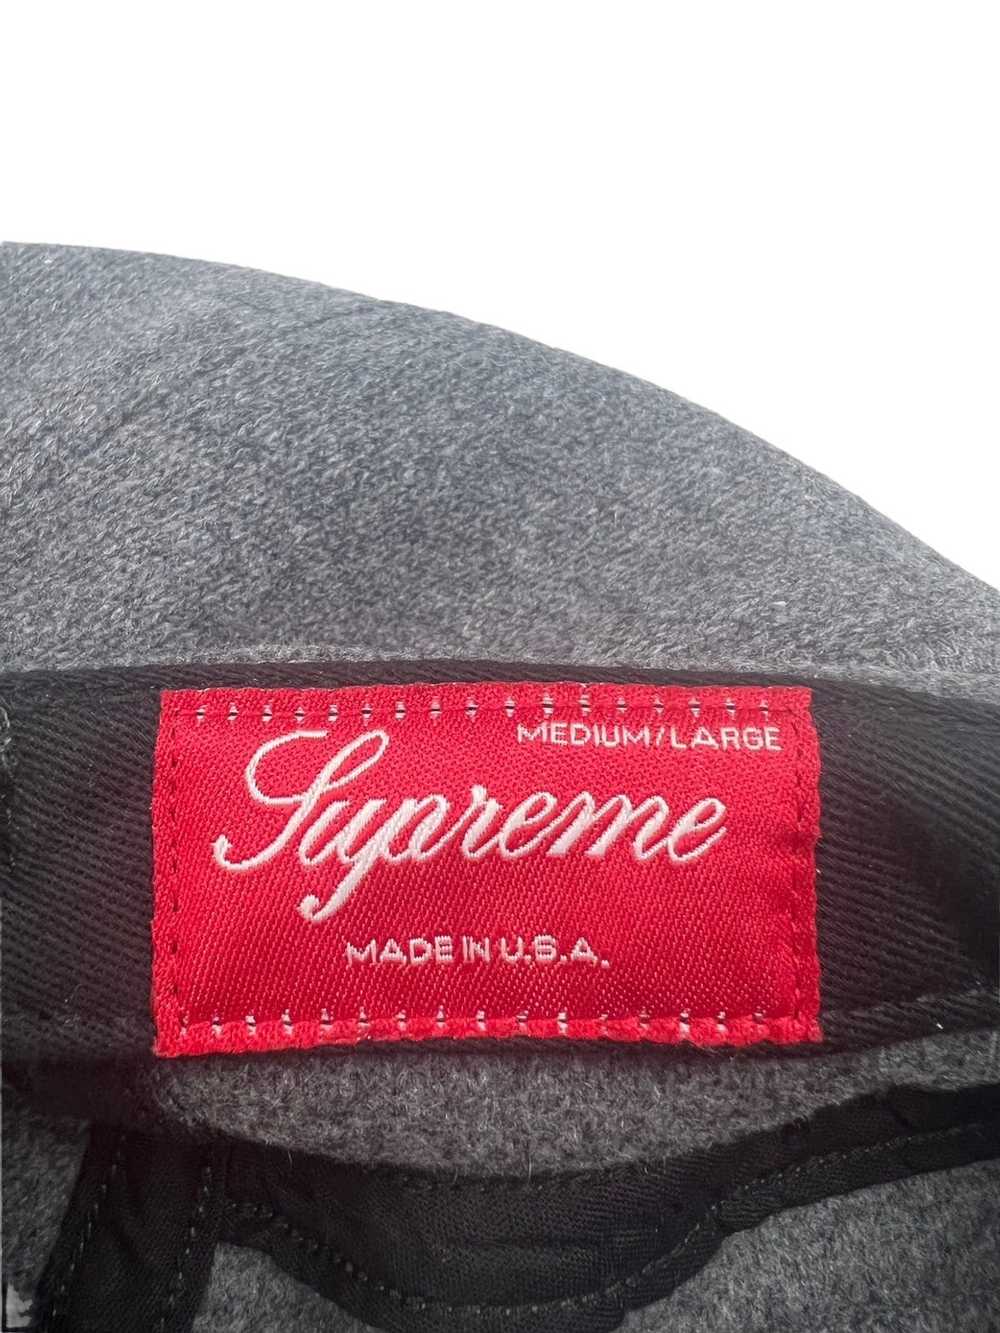 Supreme Supreme Wool Fitted Camp Cap - image 9